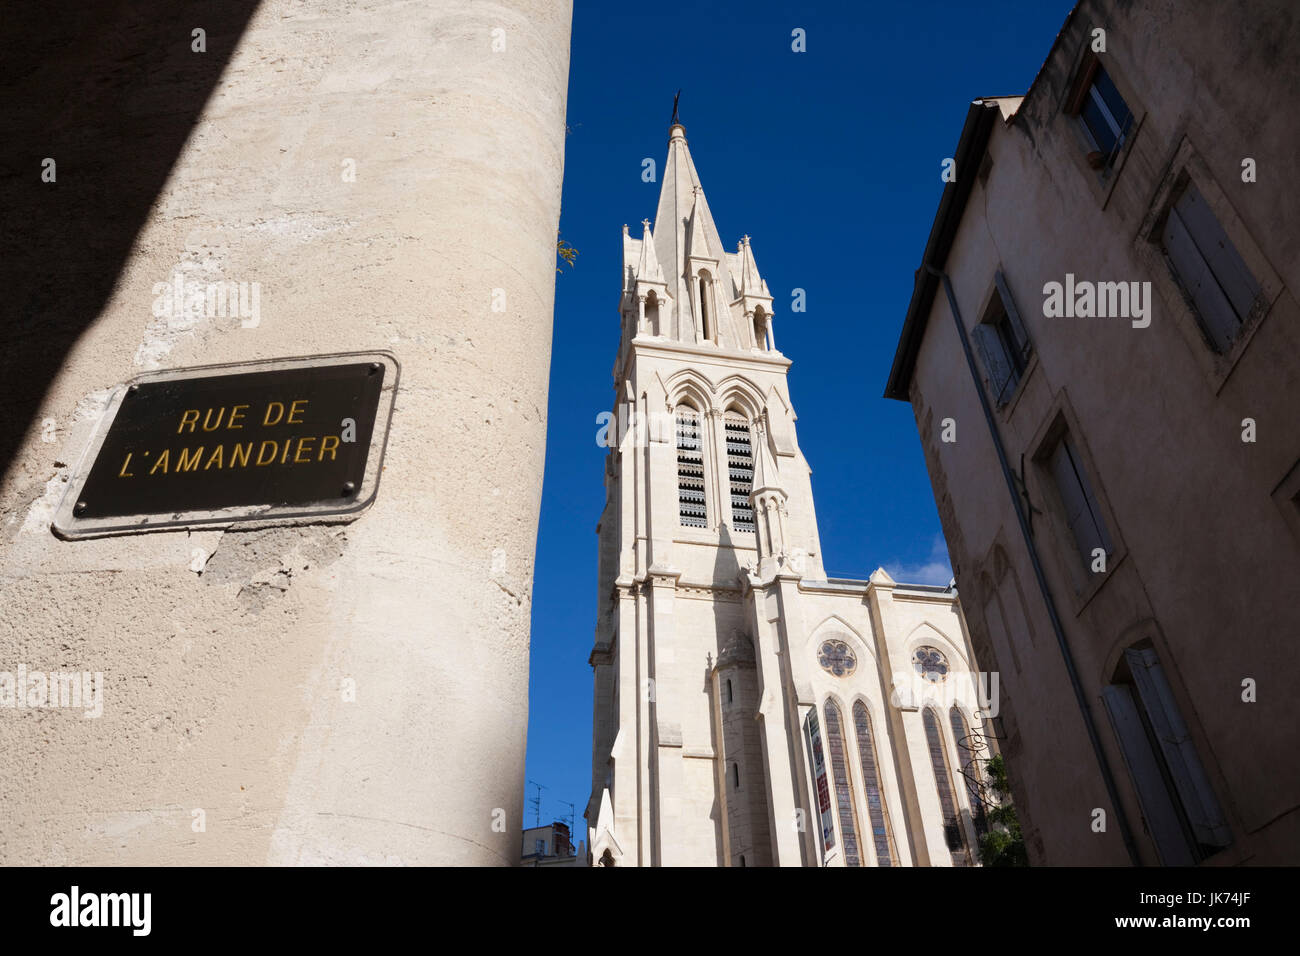 France, Languedoc-Roussillon, Herault Department, Montpellier, Eglise St-Anne church Stock Photo